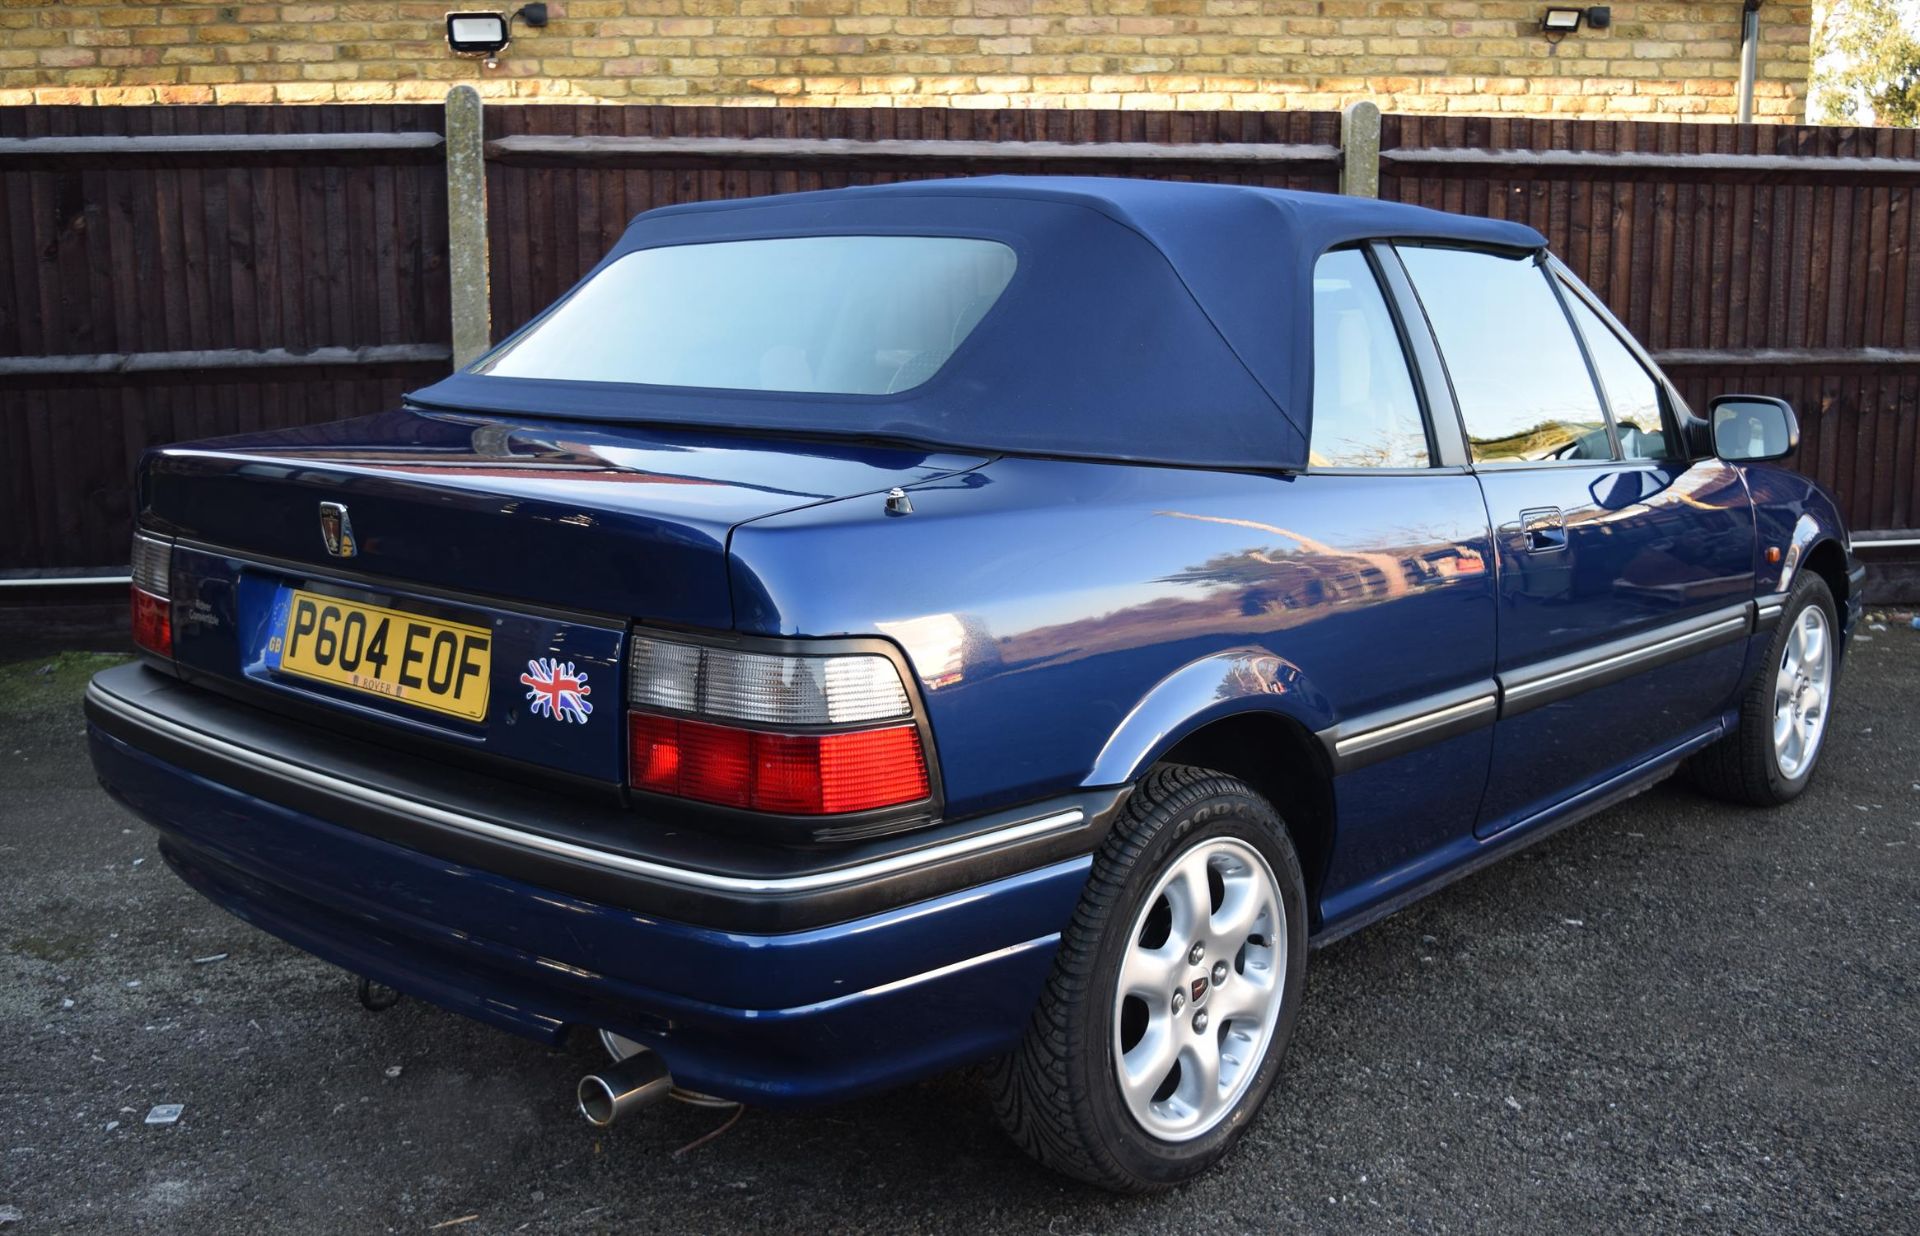 1996 Rover 216 Cabriolet - Image 4 of 25